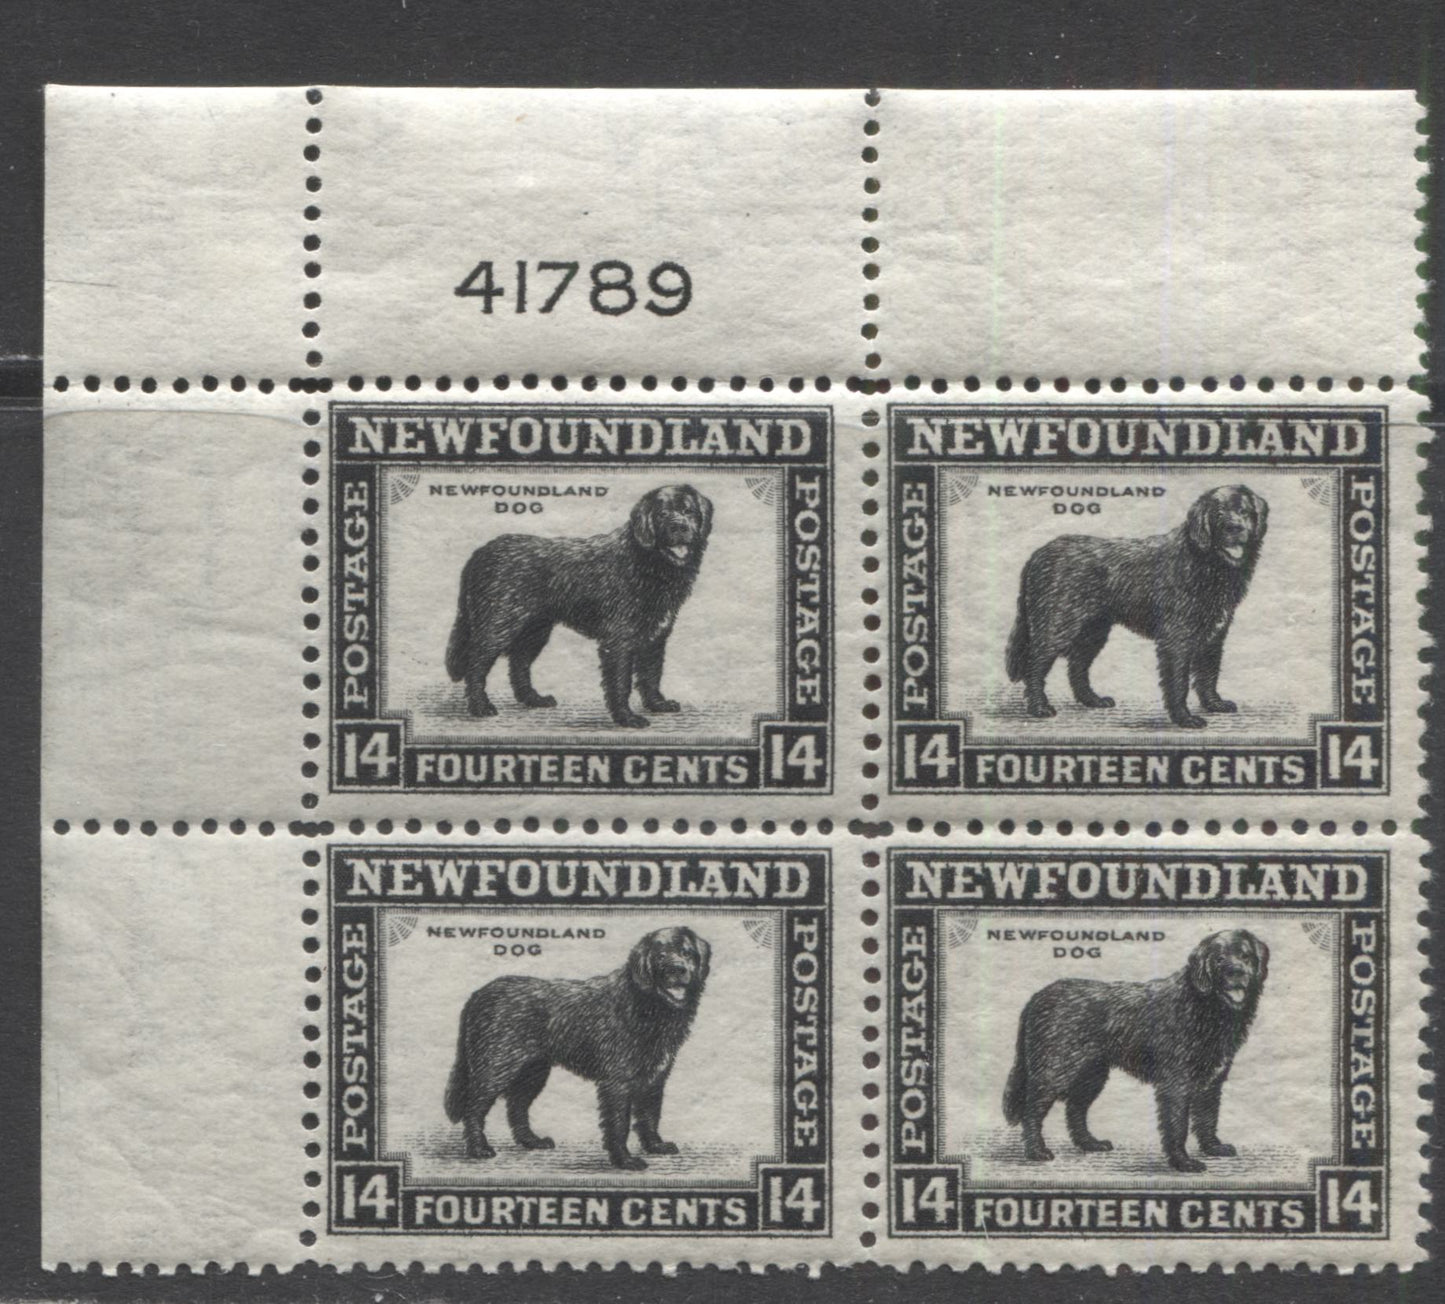 Lot 356 Newfoundland #261 14c Black NFLD Dog, 1941-1944 Waterlow Printings Definitive Reissue, A FLH Upper Left Plate 41789 Block Of 4